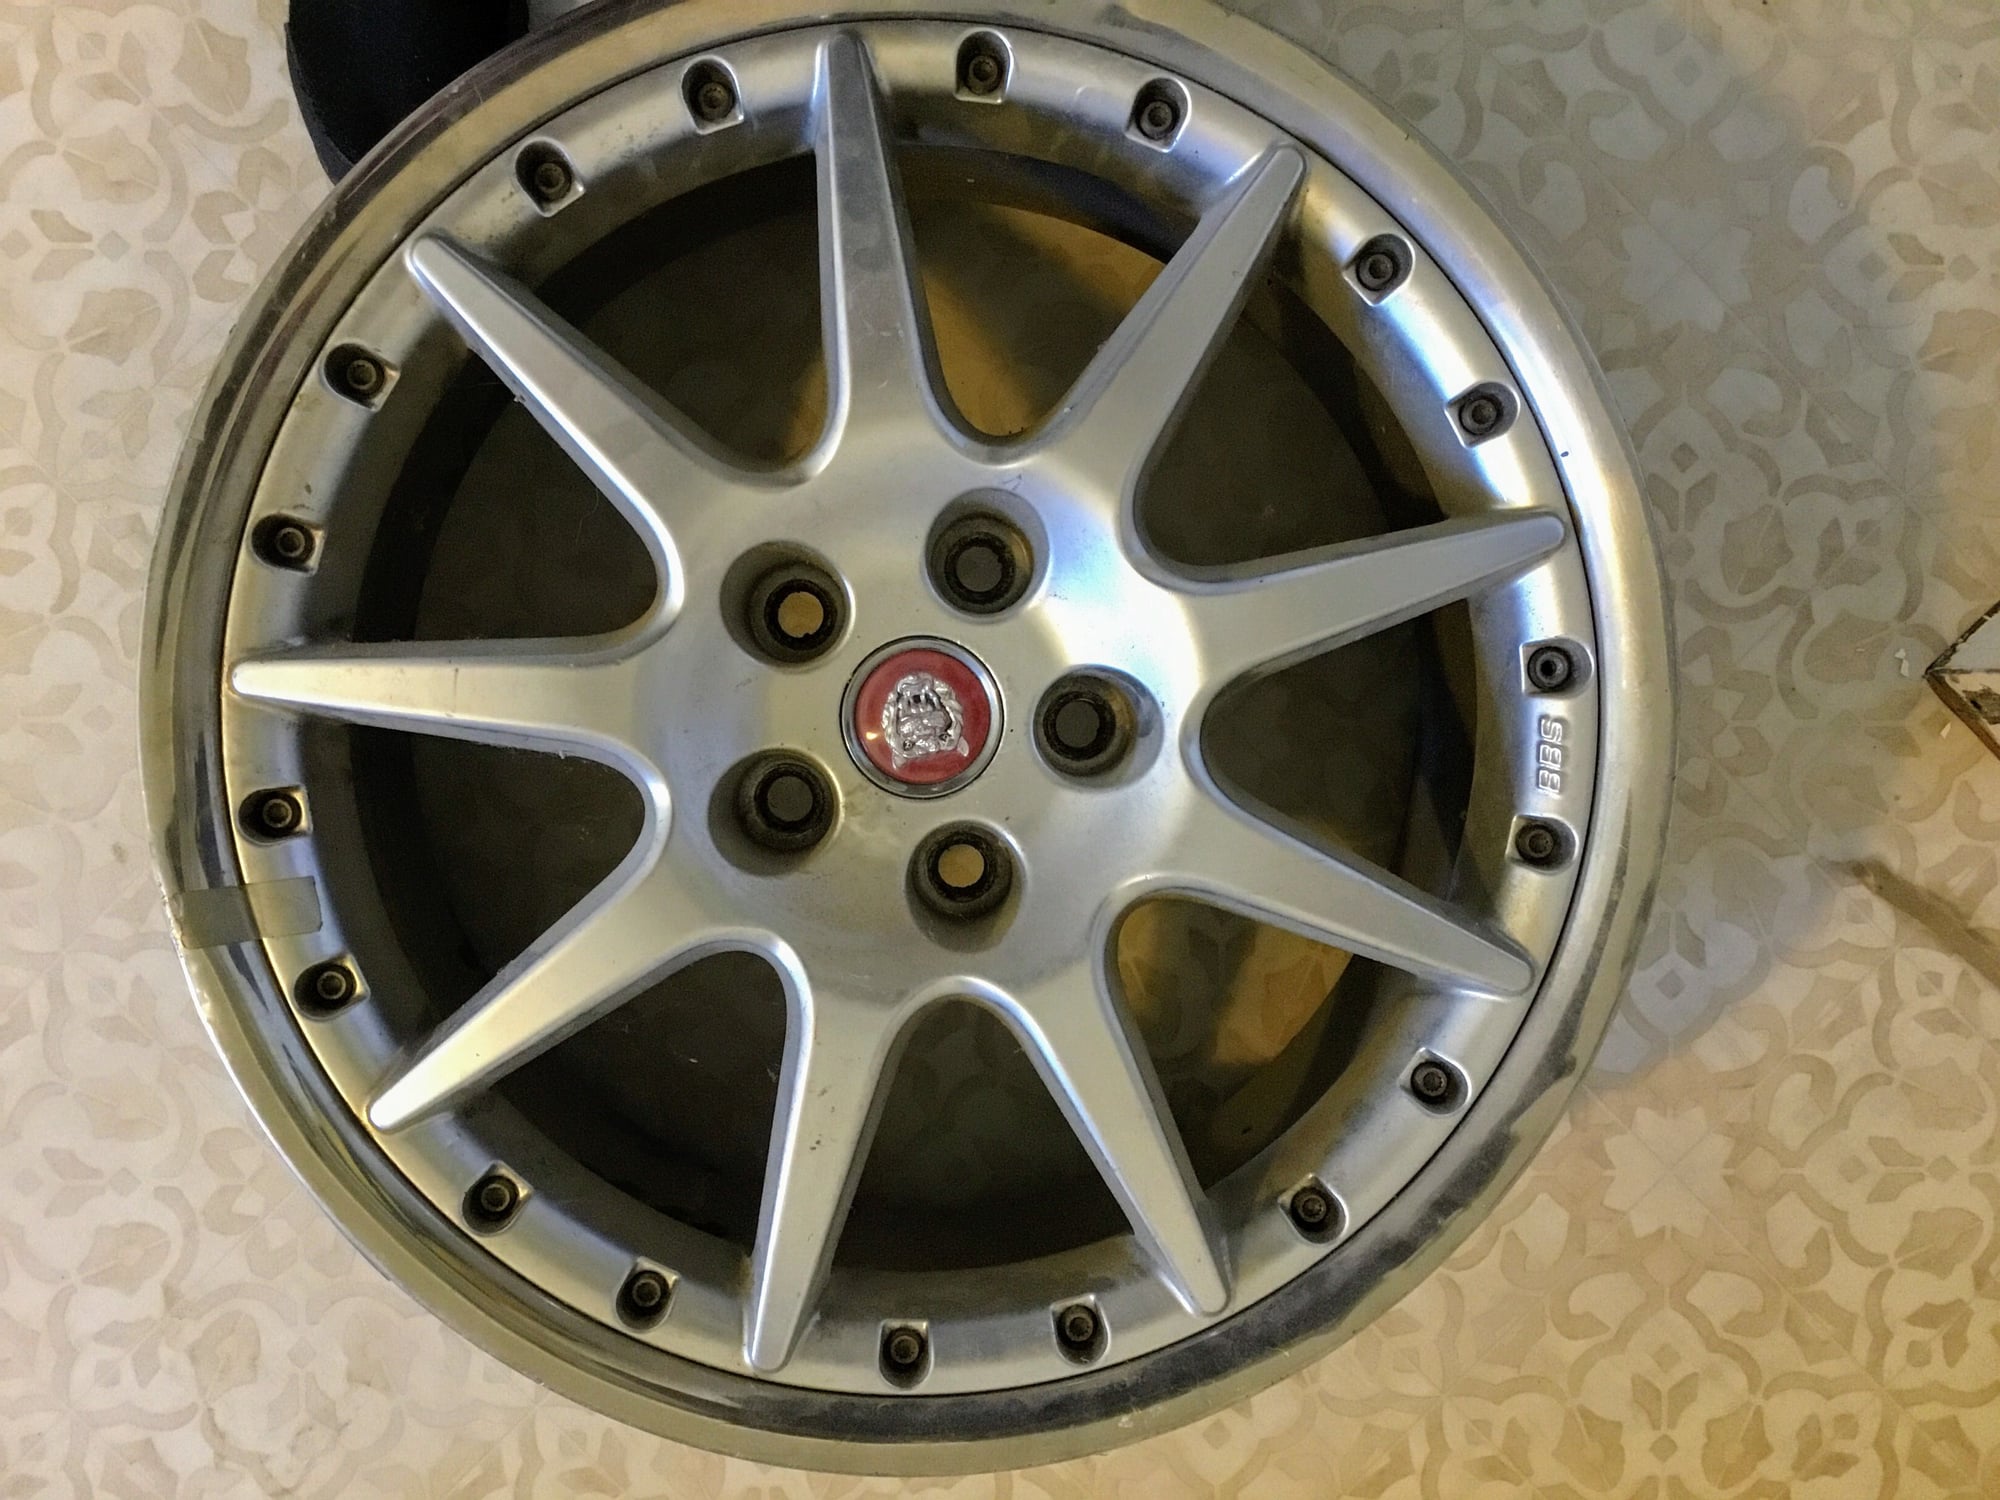 Wheels and Tires/Axles - Rare Montreal wheels , 19” - Used - 2002 Jaguar XJR - Yarmouth, NS B5A5A8, Canada